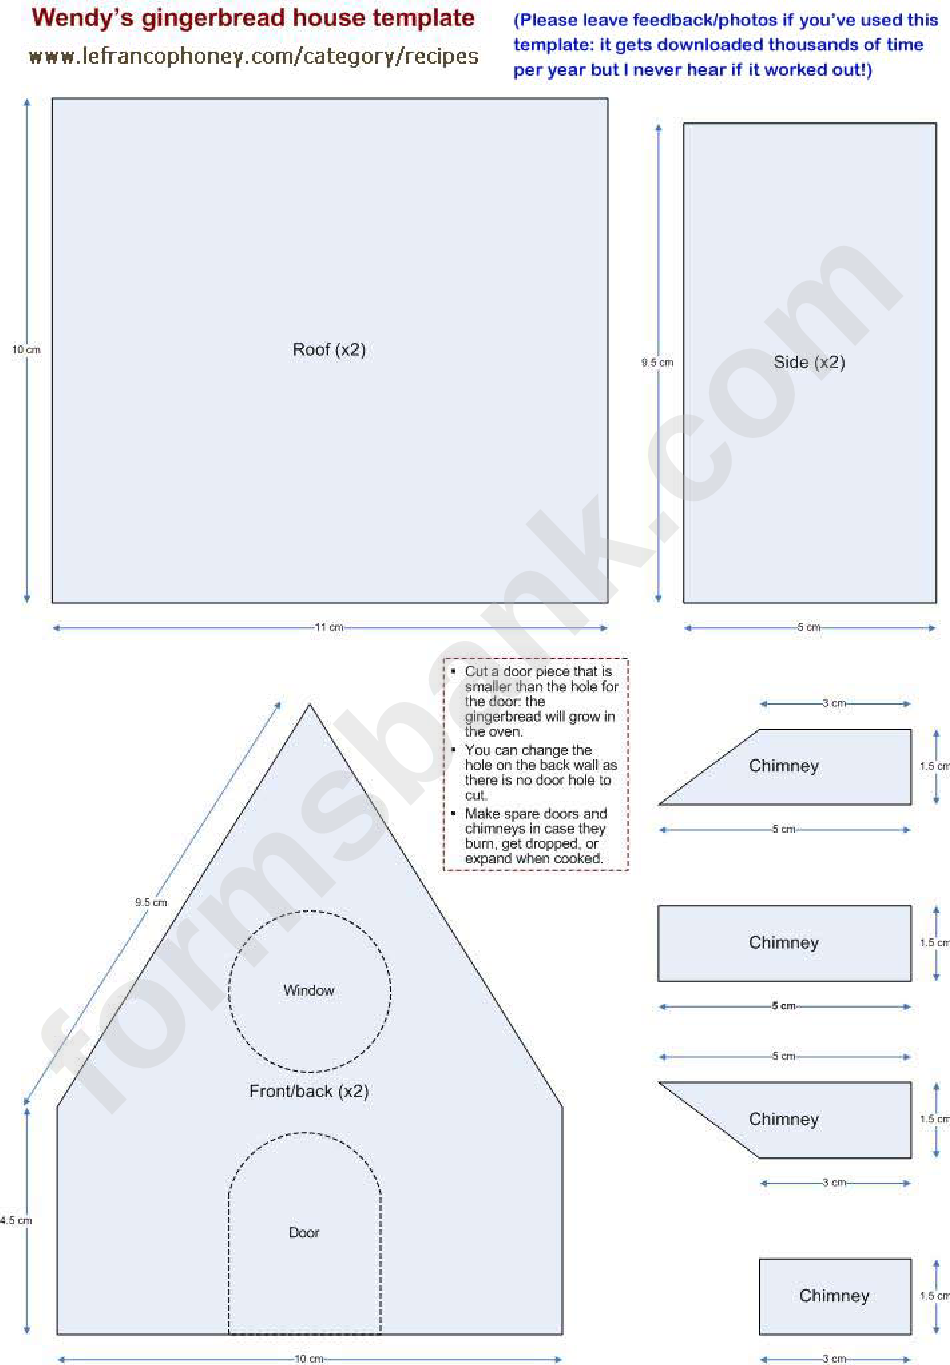 wendys gingerbread house template printable pdf download